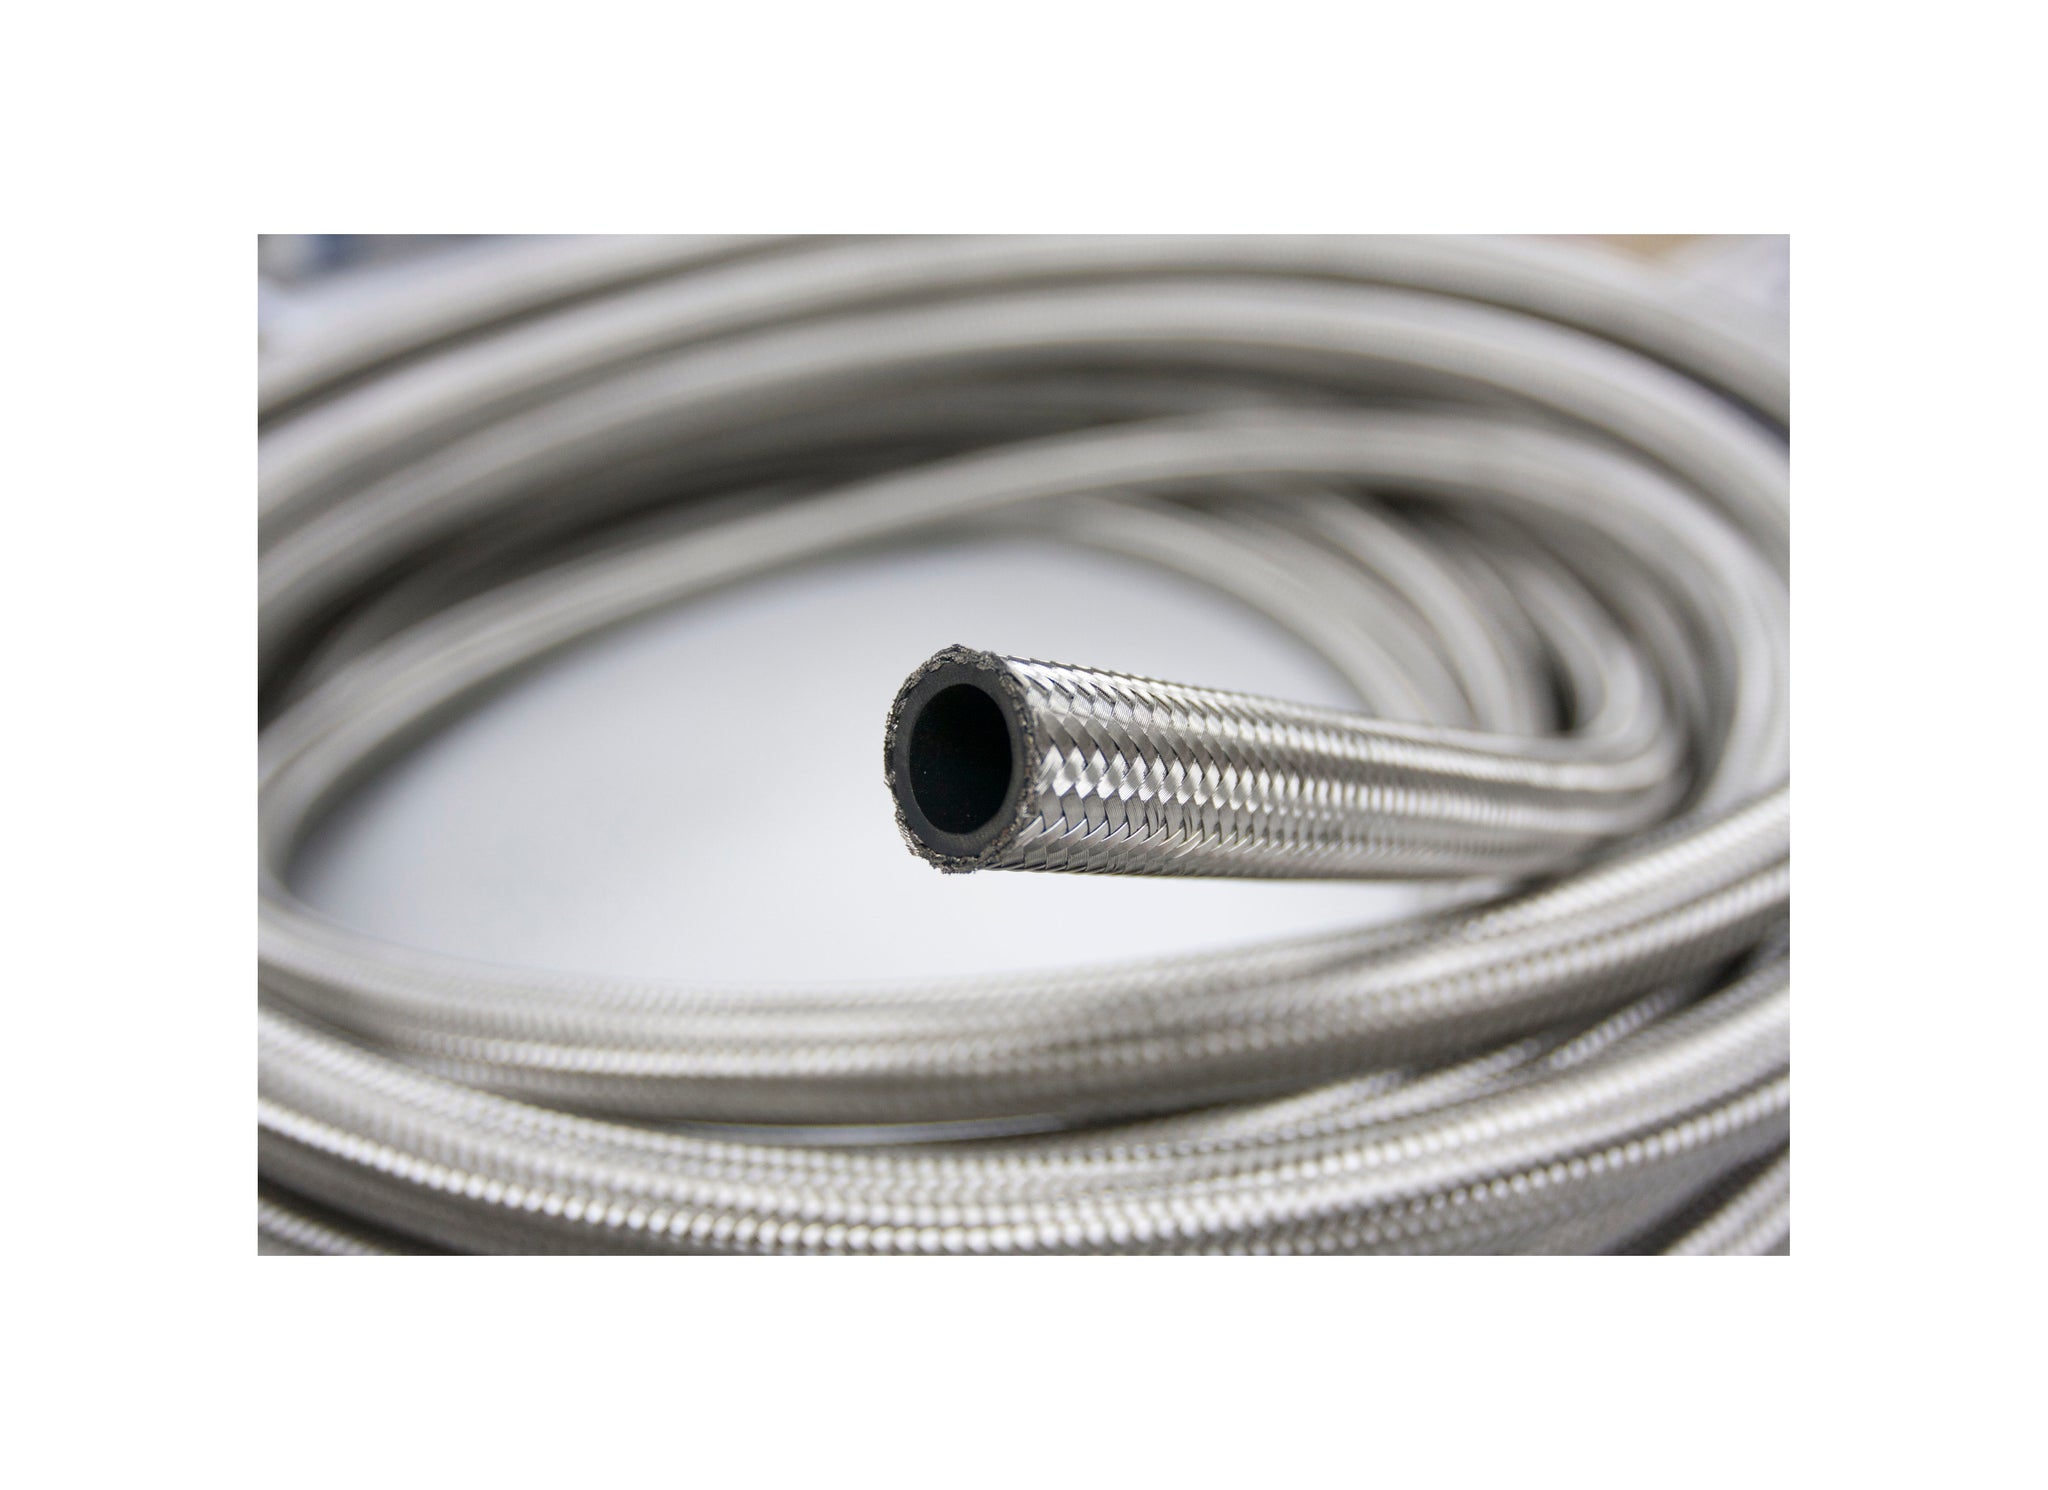 Stainless Steel Braided Fuel Oil Gasoline Hose Line by 1 Meter